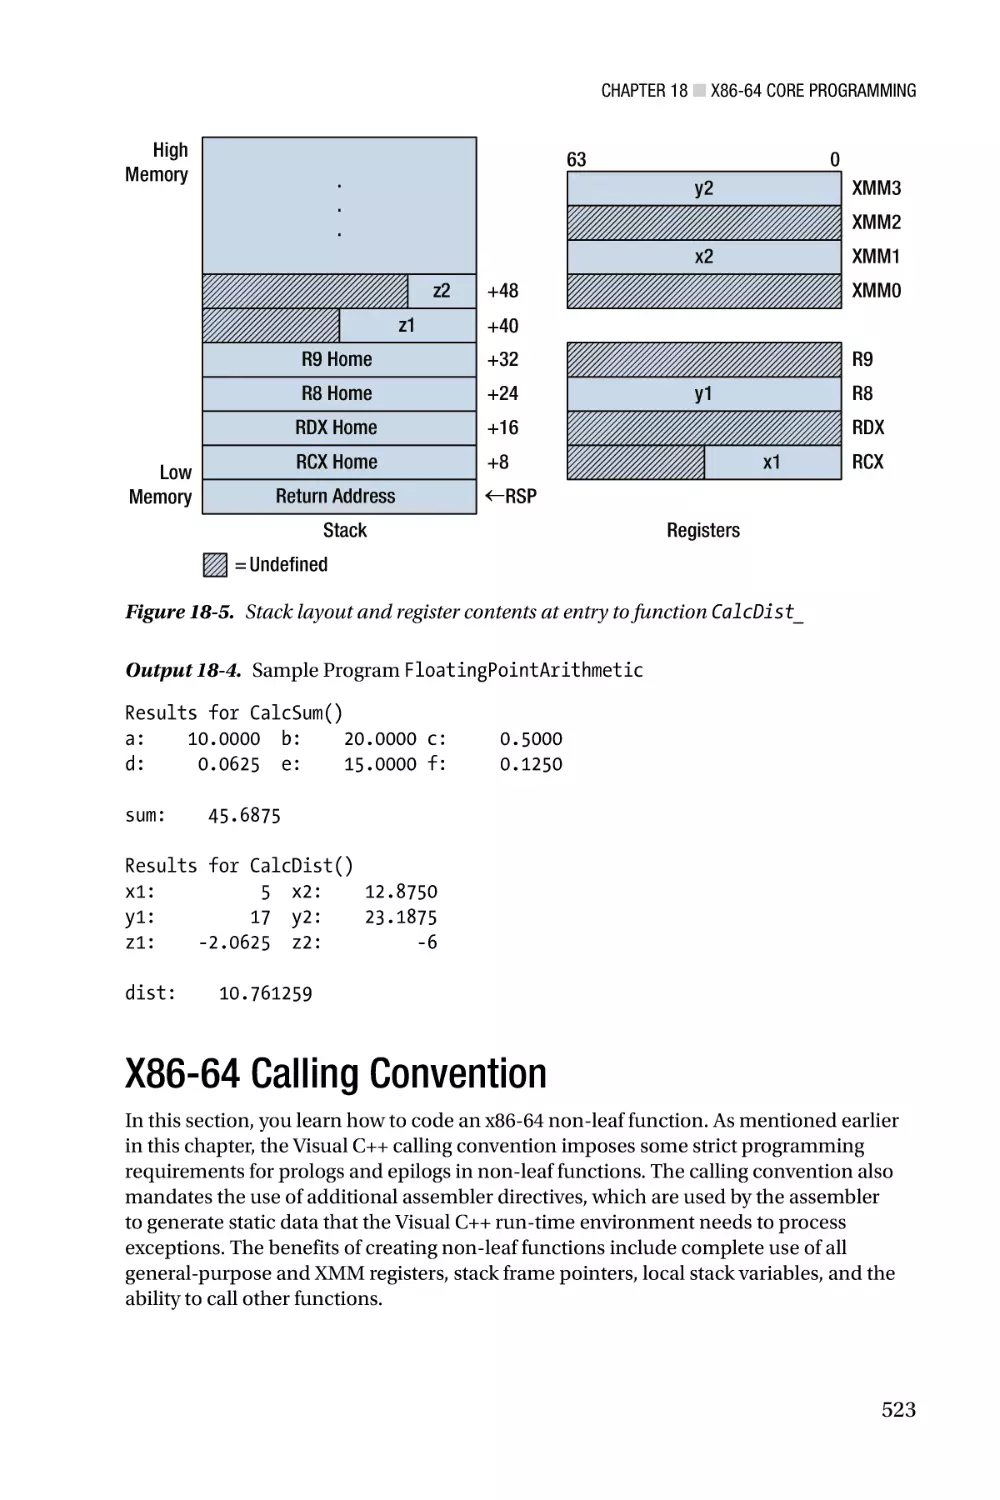 X86-64 Calling Convention